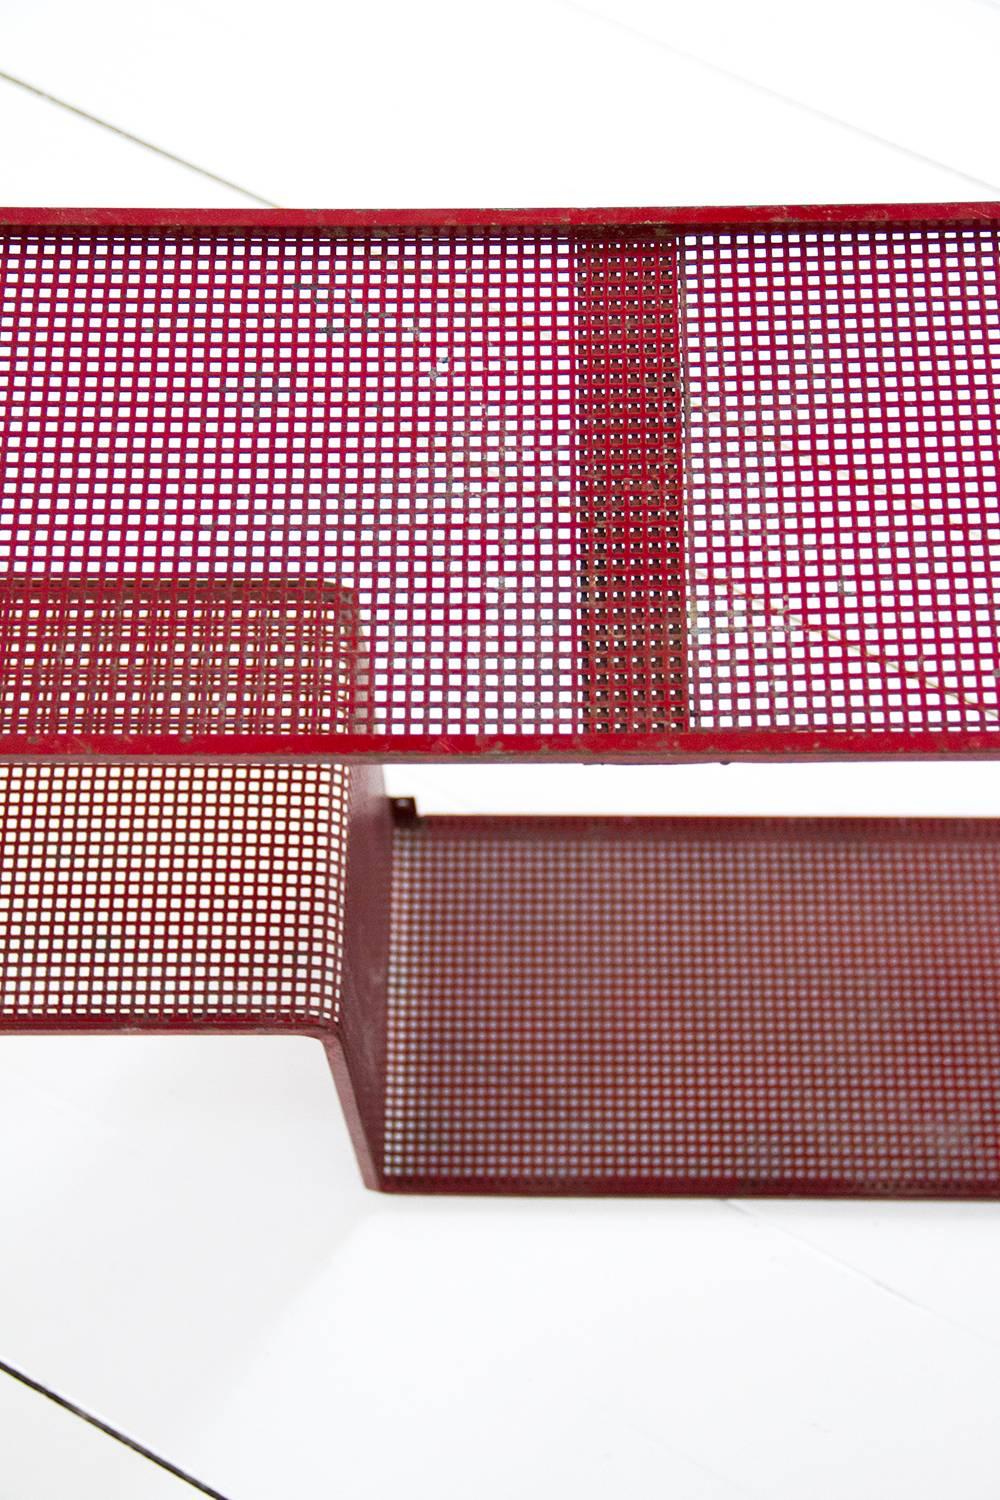 Red Dedal Wall Shelf by Mathieu Matégot, Perforated Steel, circa 1950, France For Sale 3